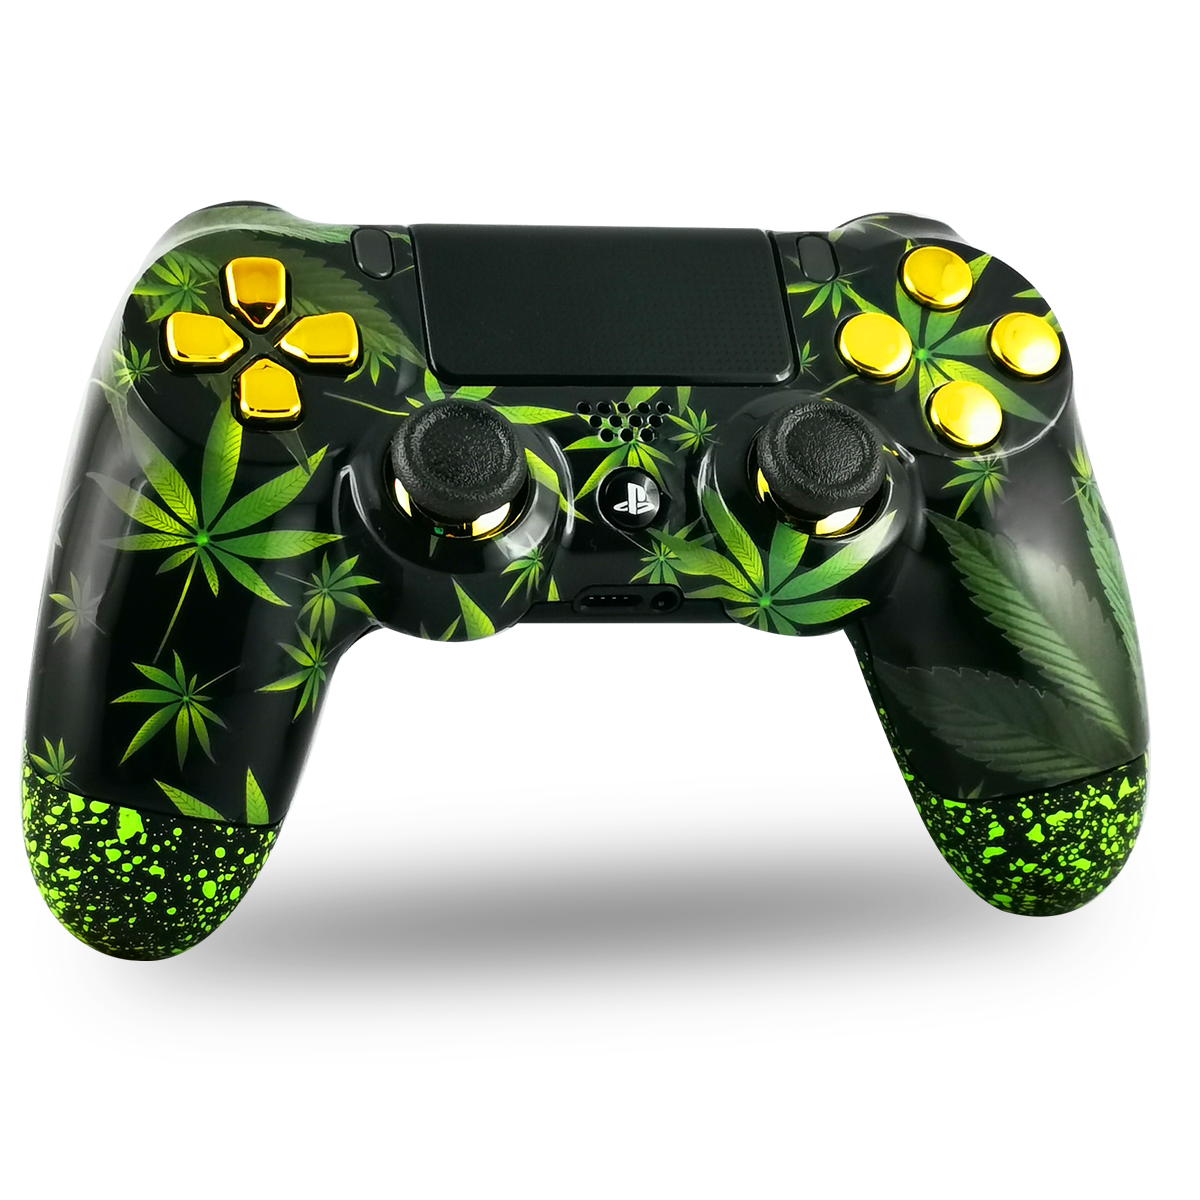 manette-PS4-custom-playstation-4-sony-personnalisee-drawmypad-inconnu23